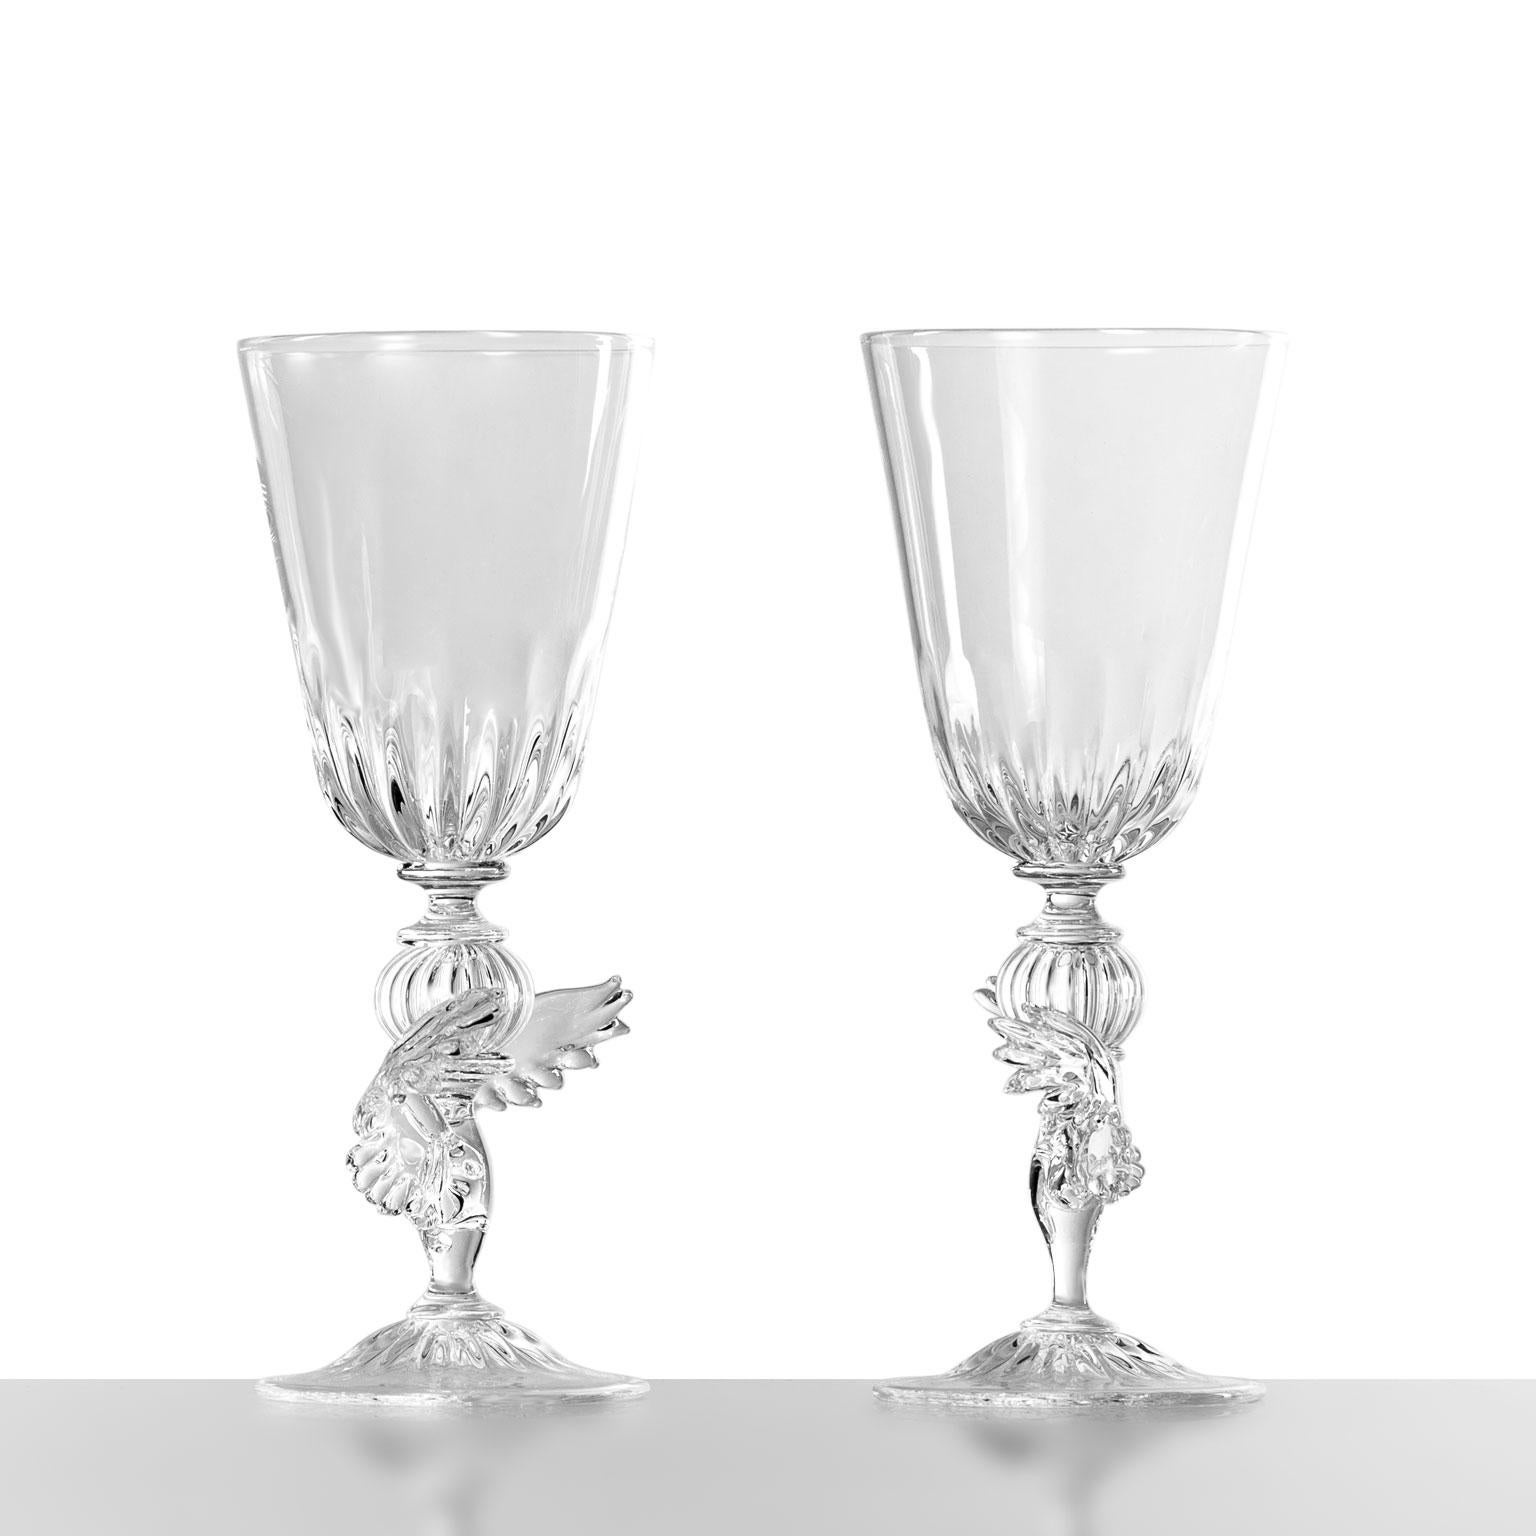 Italian Contemporary Trionfo Hand-Blown Glass Sculptured A pair of  Decorative Goblets  For Sale